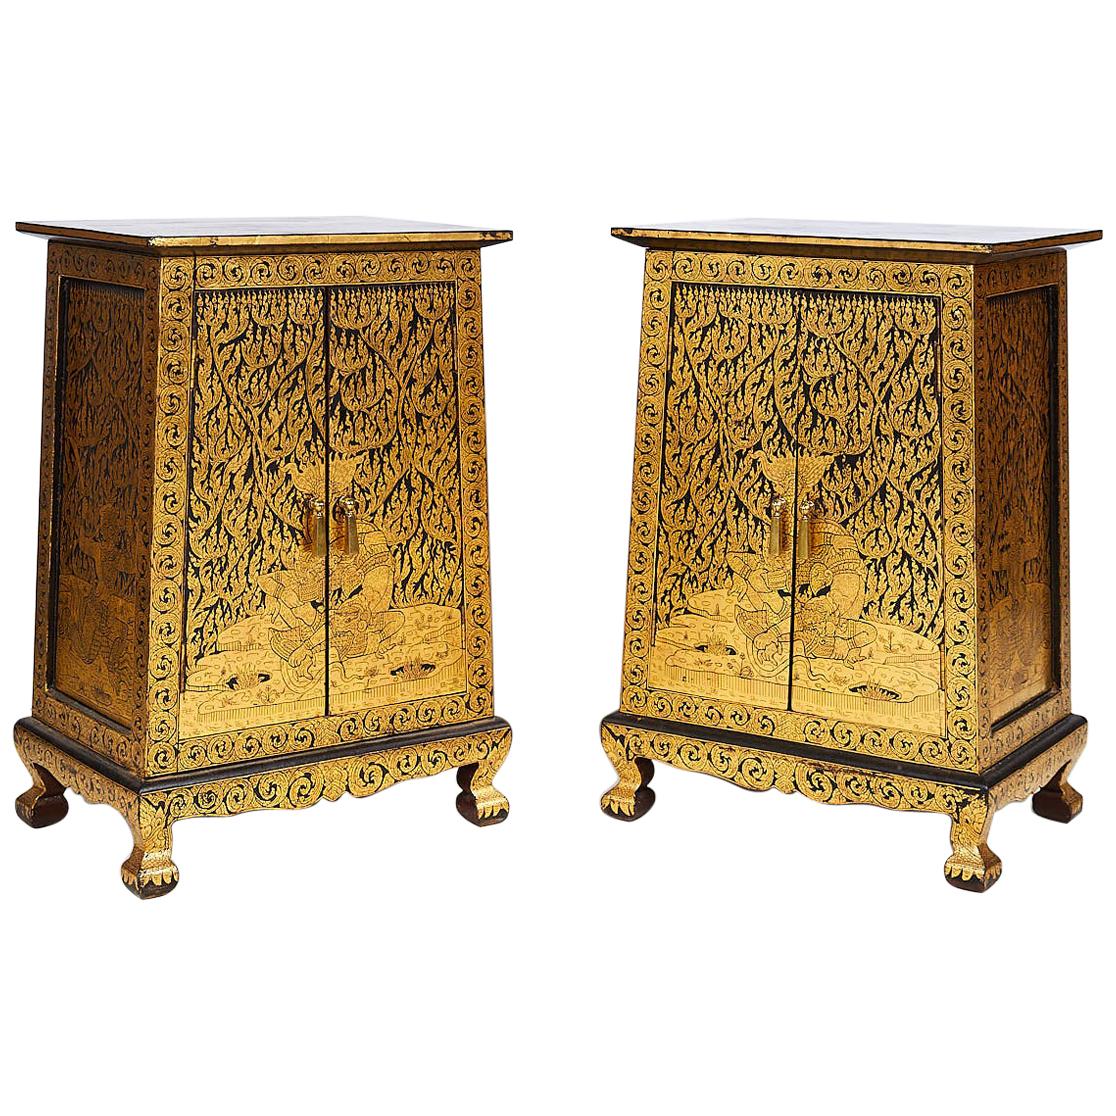 Pair of Thai Manuscript Cabinets of Lacquer and Gold Leaf, 20th Century